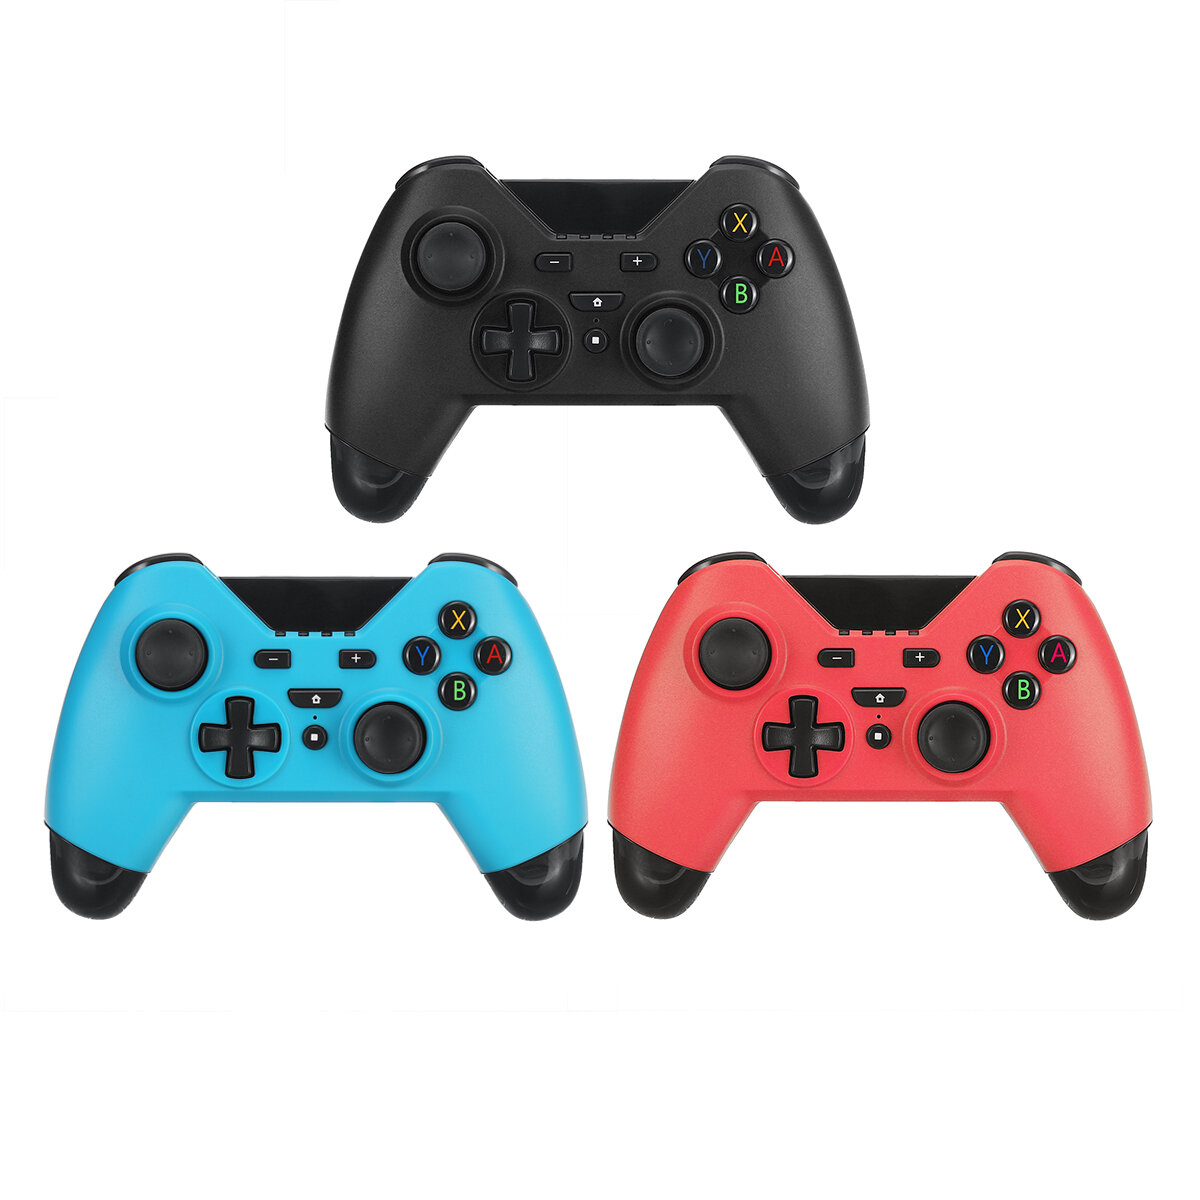 

Wireless Bluetooth Game Controller Gamepad Support Turbo Gyro Axis Vibration Feedback for Nintendo Switch/Switch Lite/PC